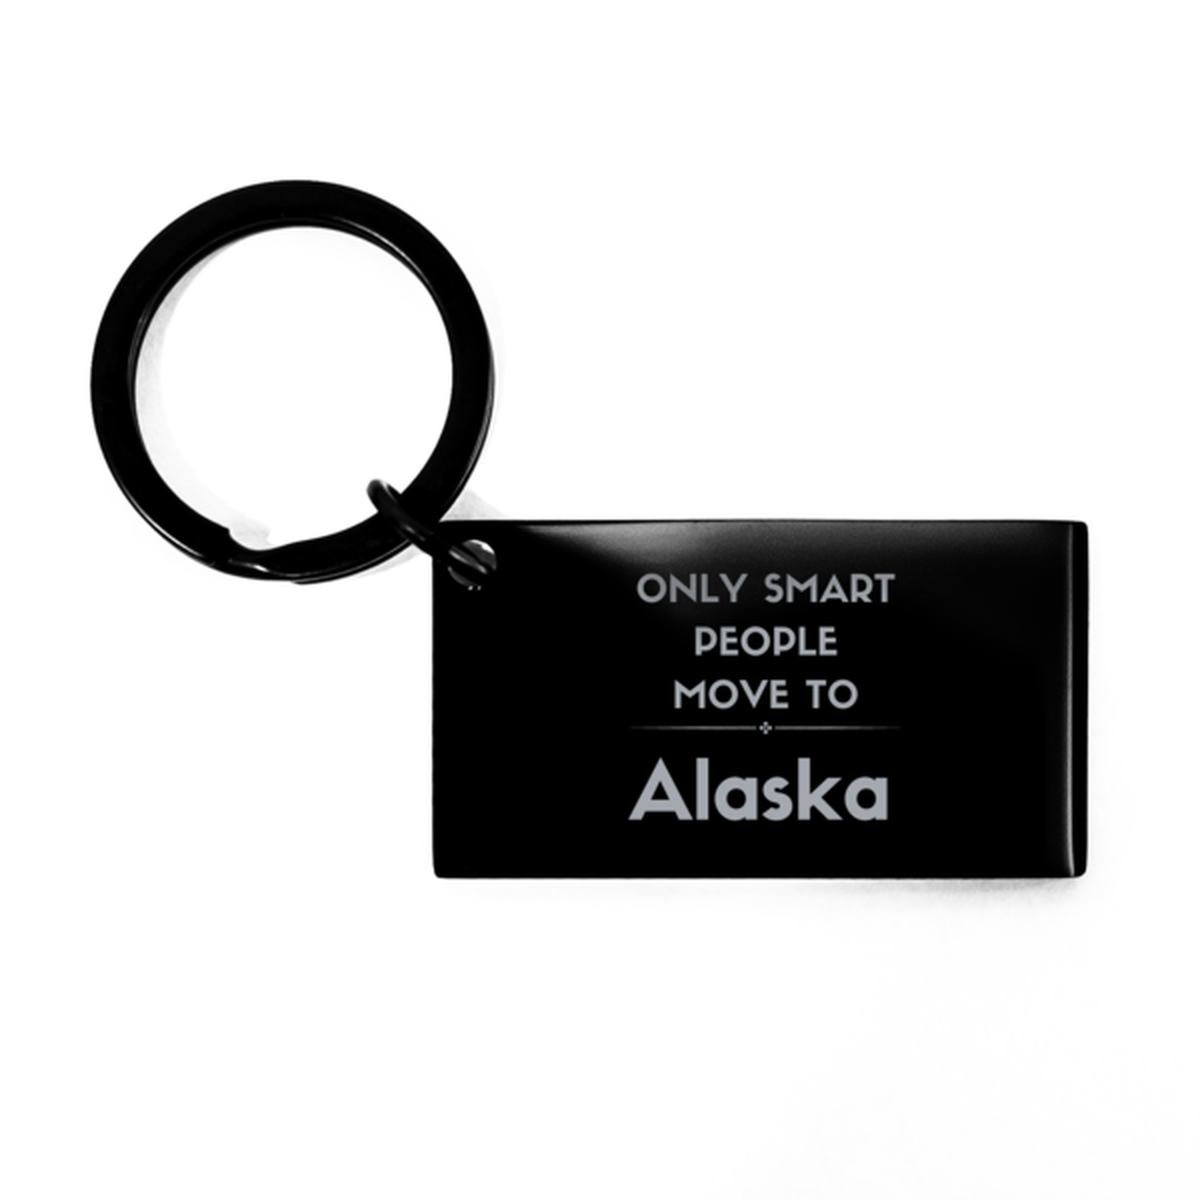 Only smart people move to Alaska Keychain, Gag Gifts For Alaska, Move to Alaska Gifts for Friends Coworker Funny Saying Quote